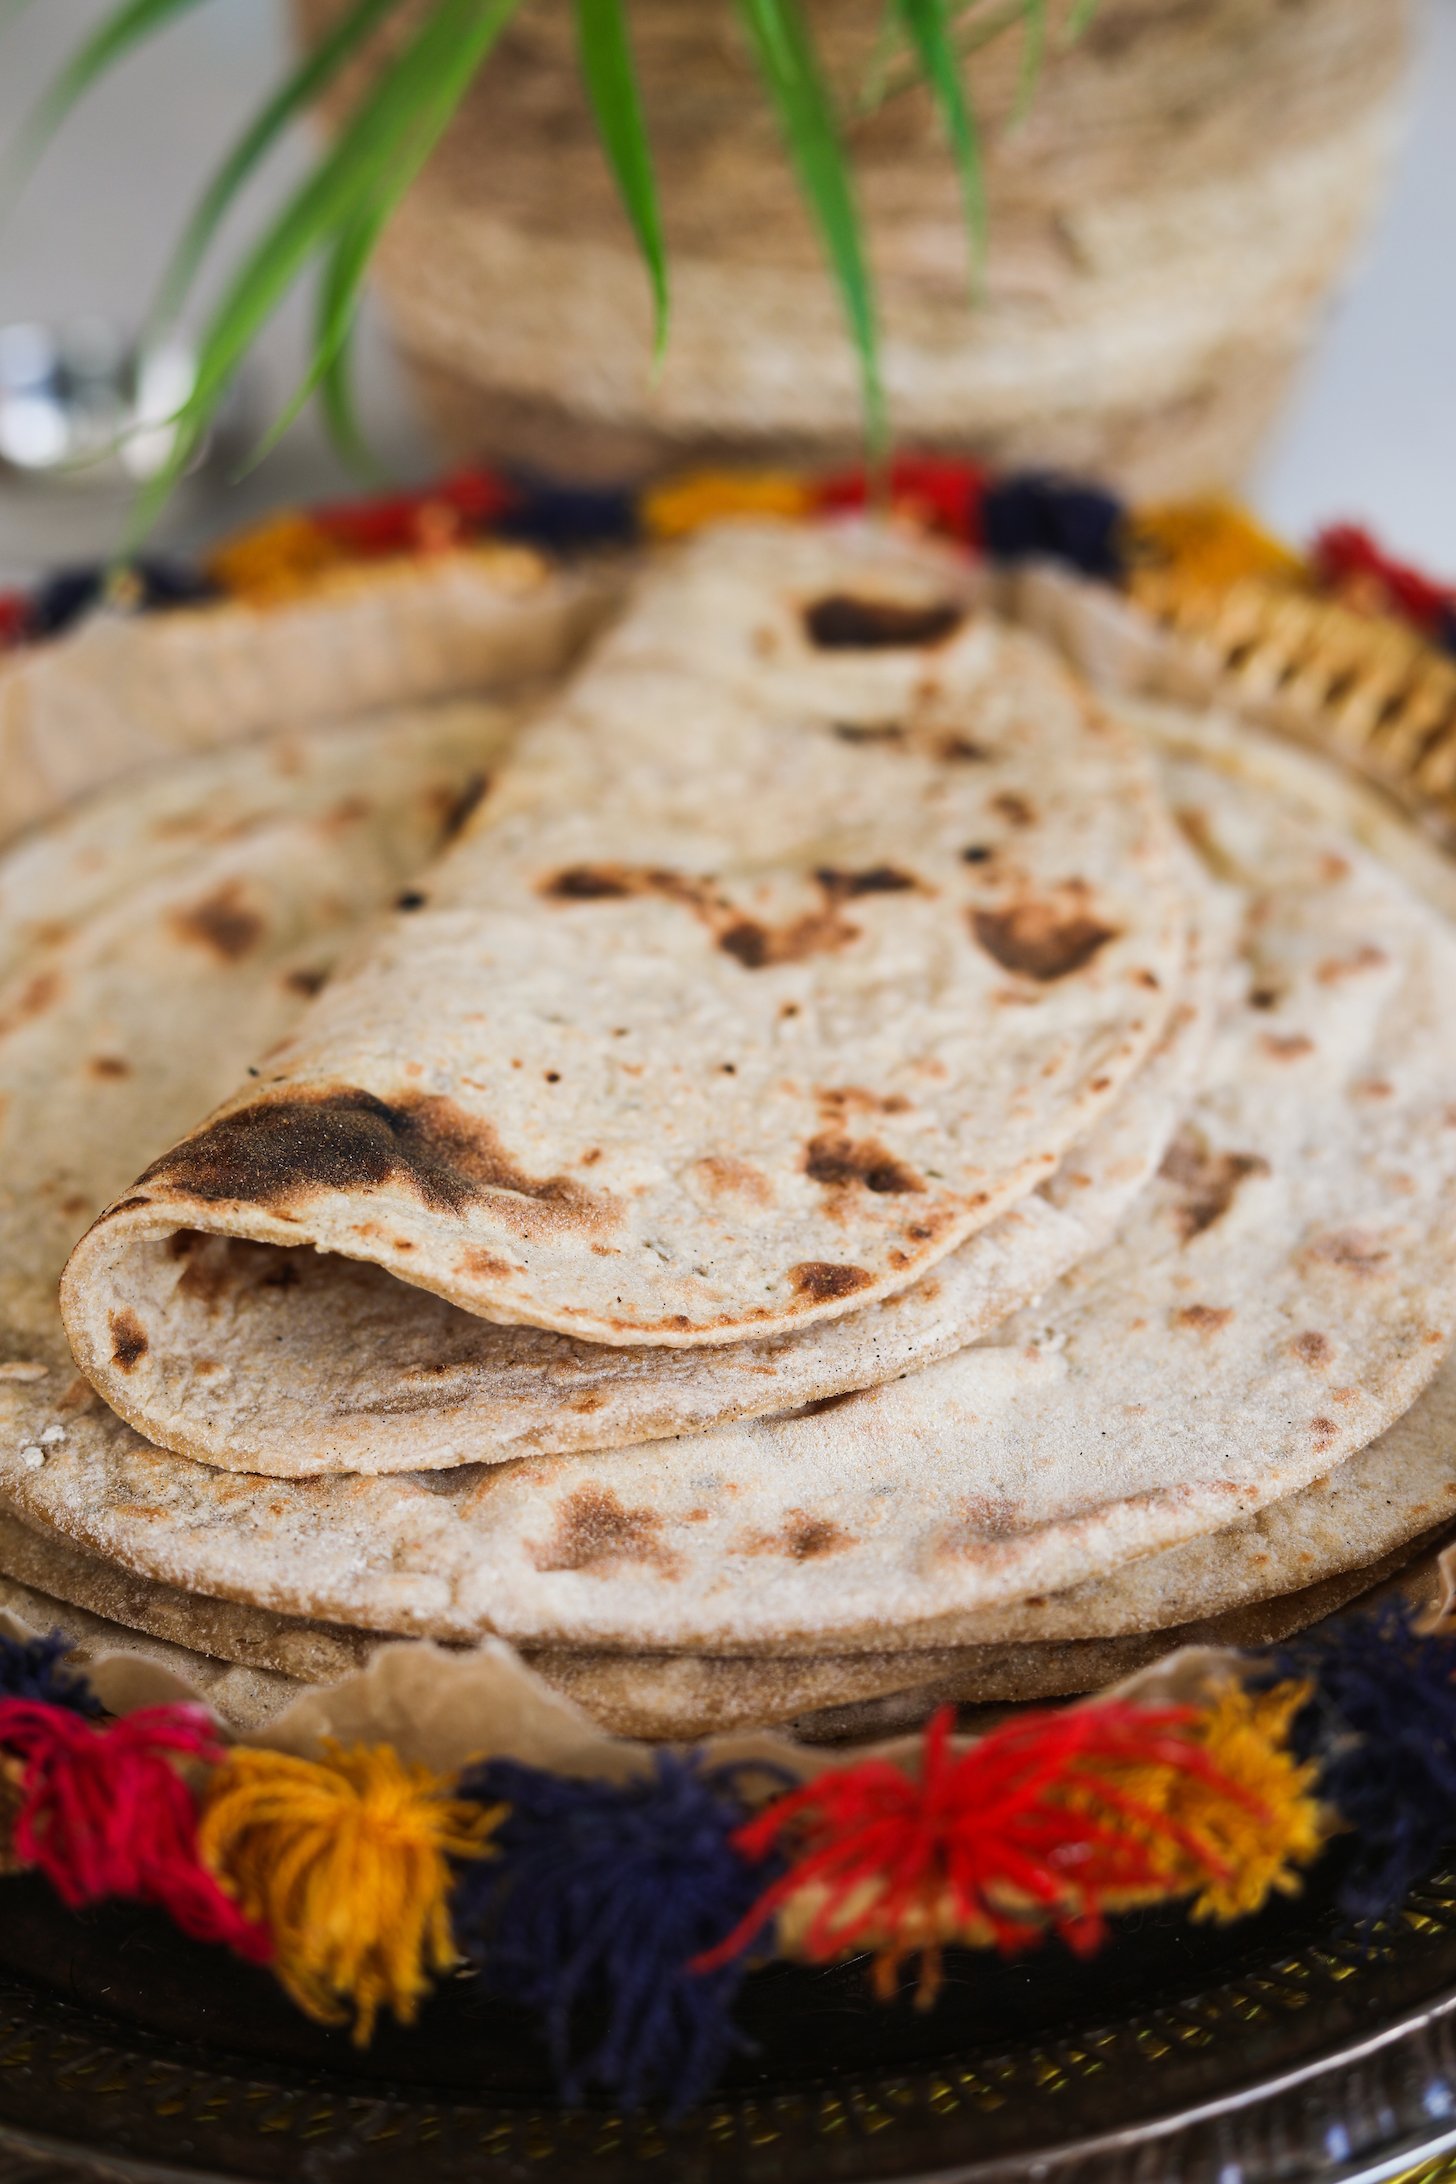 A folded roti on a pile of rotis on a decorative plate.